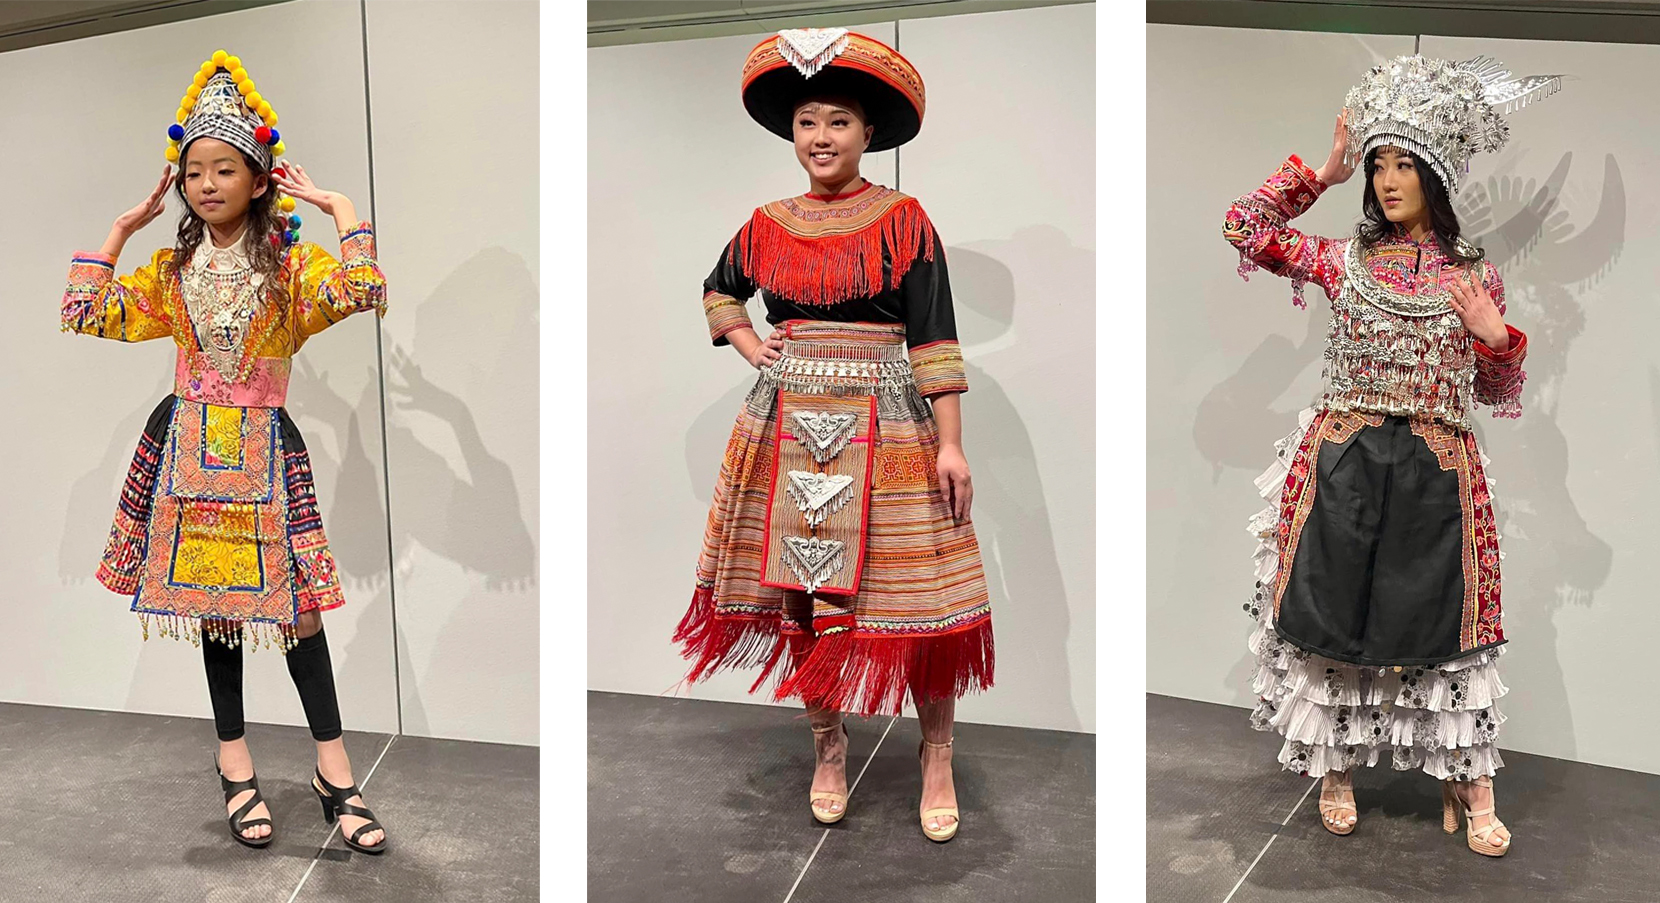 Three models on the runway posing in Hmong outfits